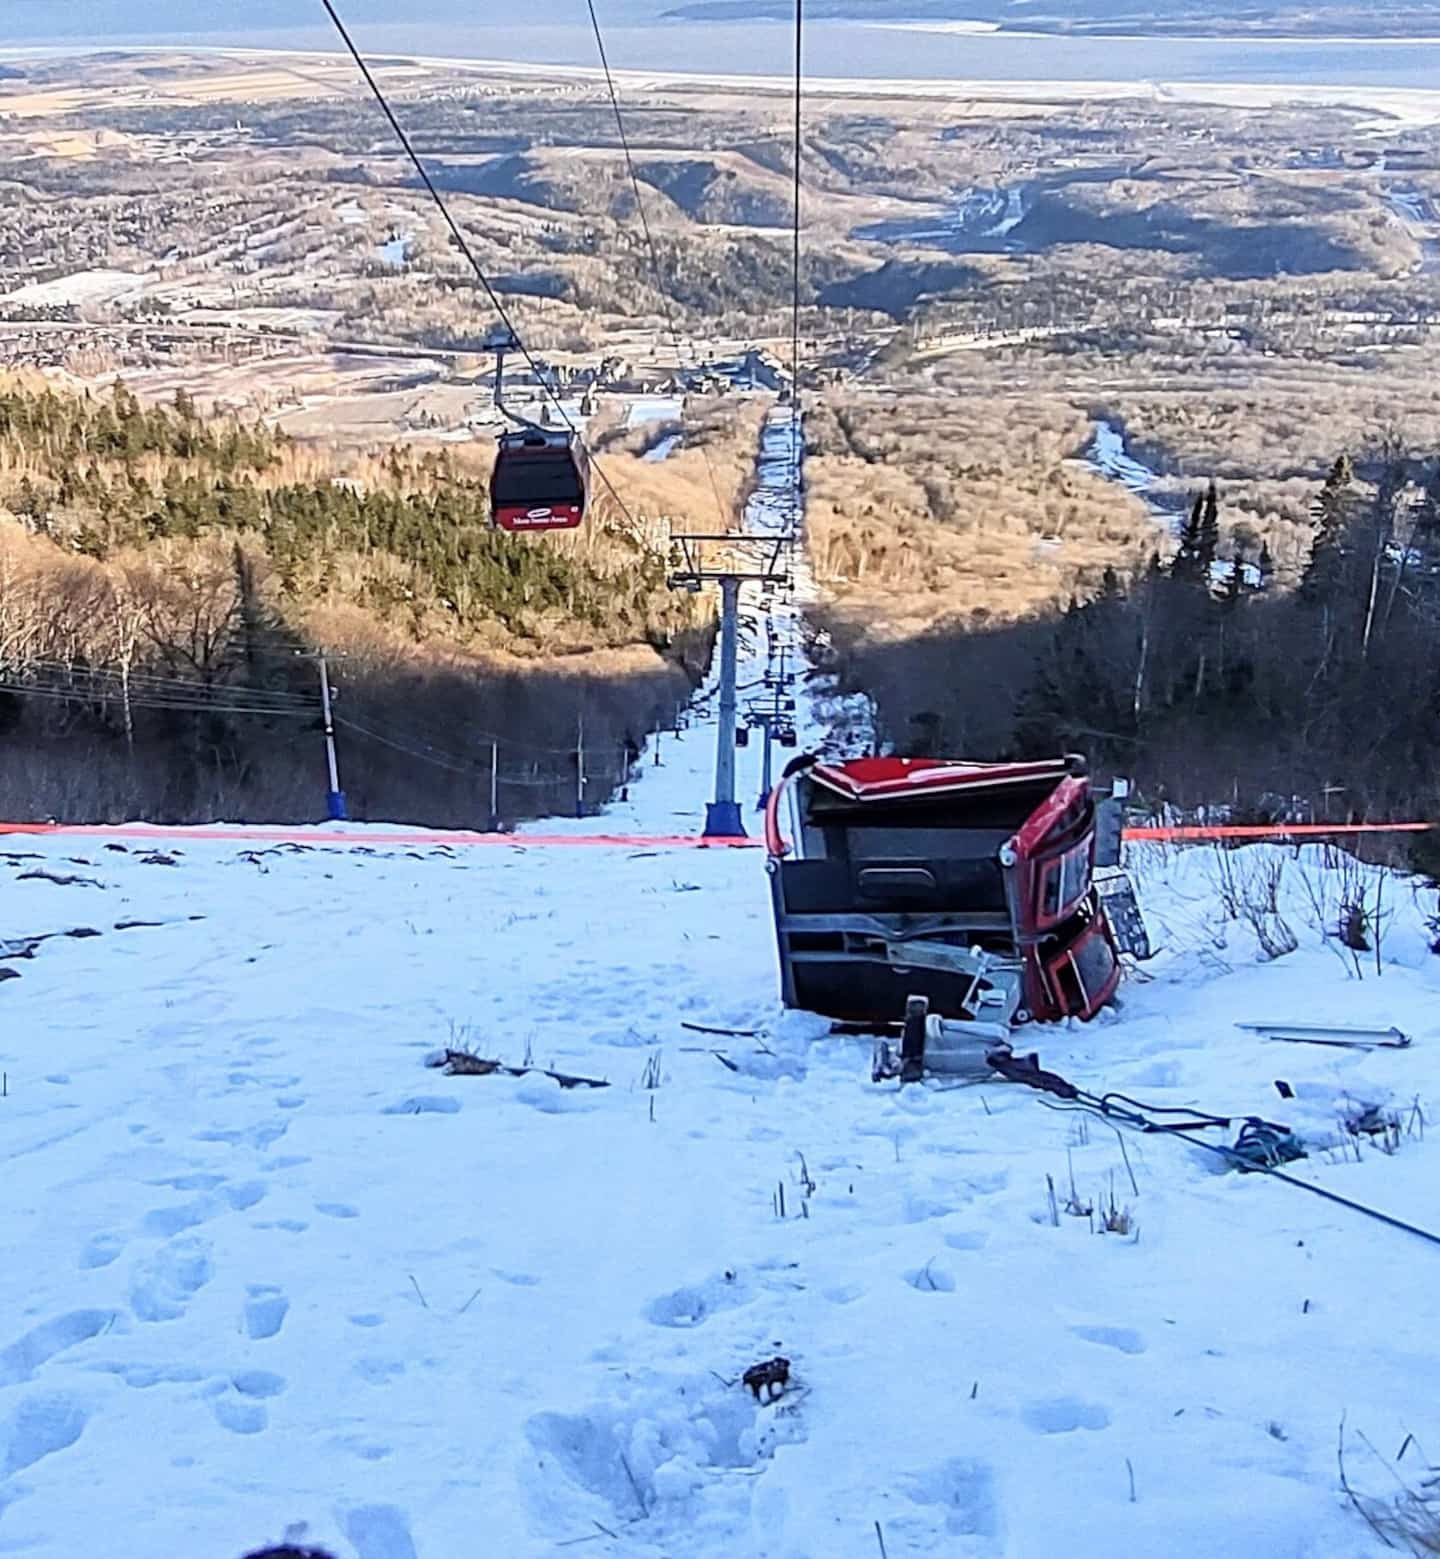 Mont-Sainte-Anne: the ski lifts will be back in service